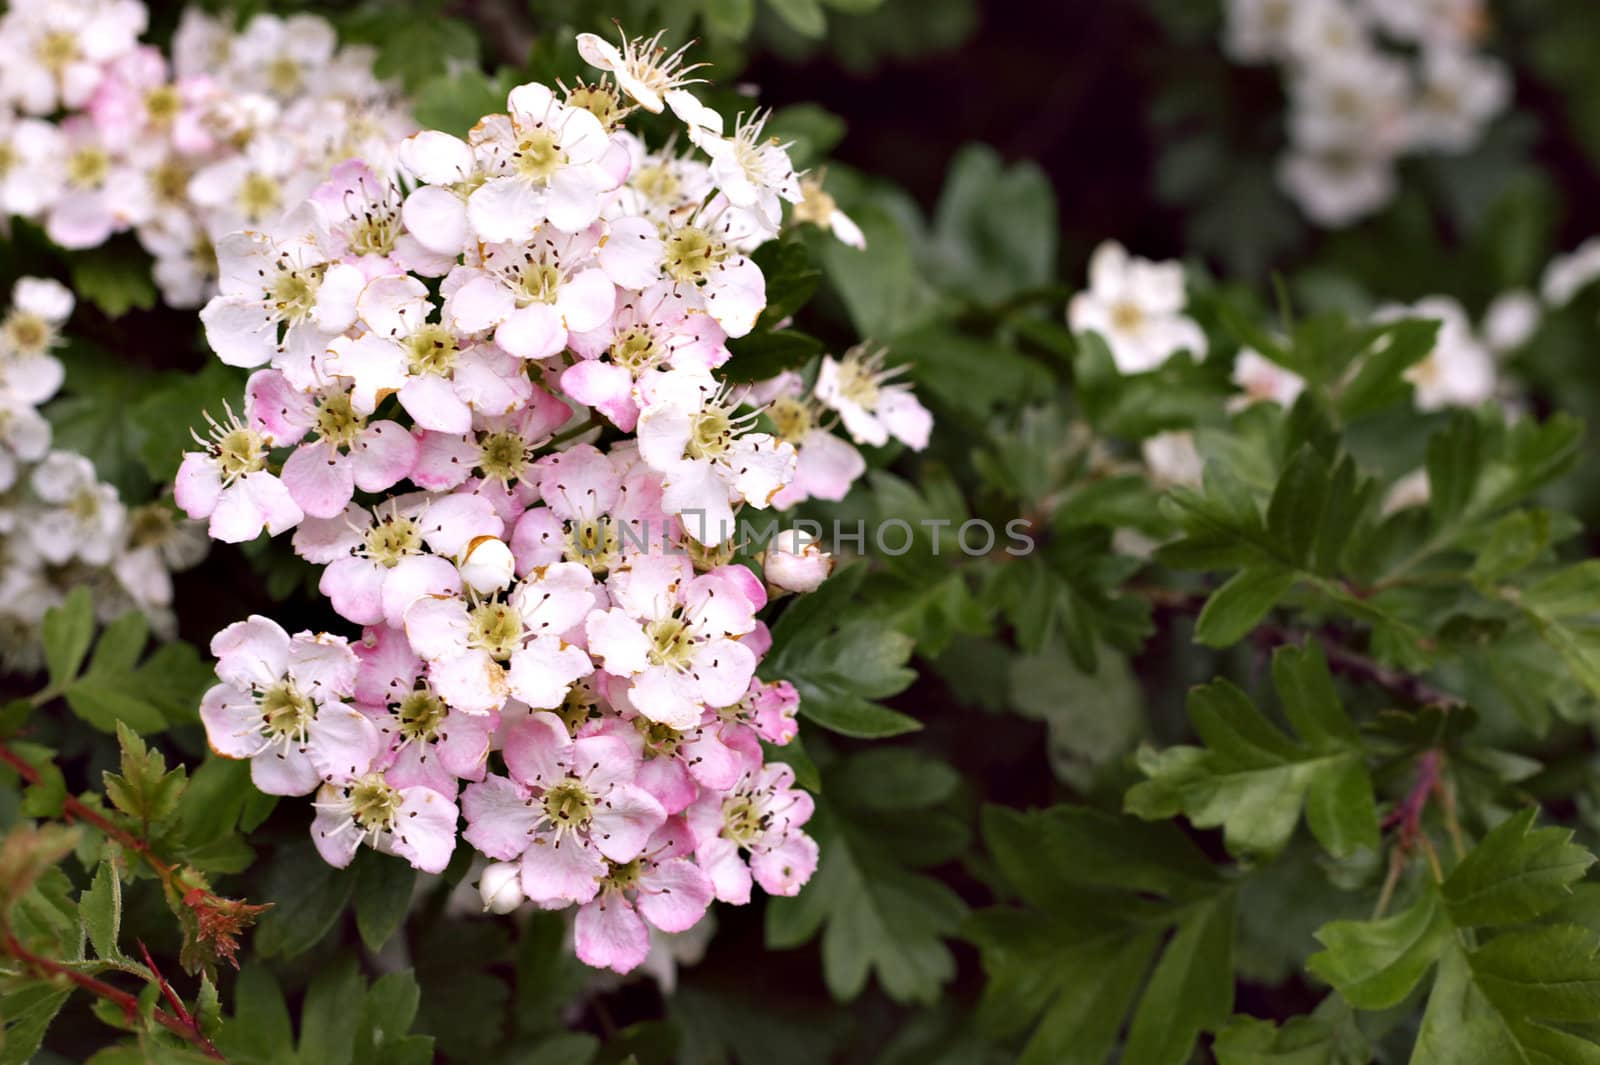 rose tinted version of white thorn flowers, common hawthorn or Crataegus monogyna, also known as May, Maythorn, Quickthorn, and Haw, used as hedges or as natural remedy for the heart.